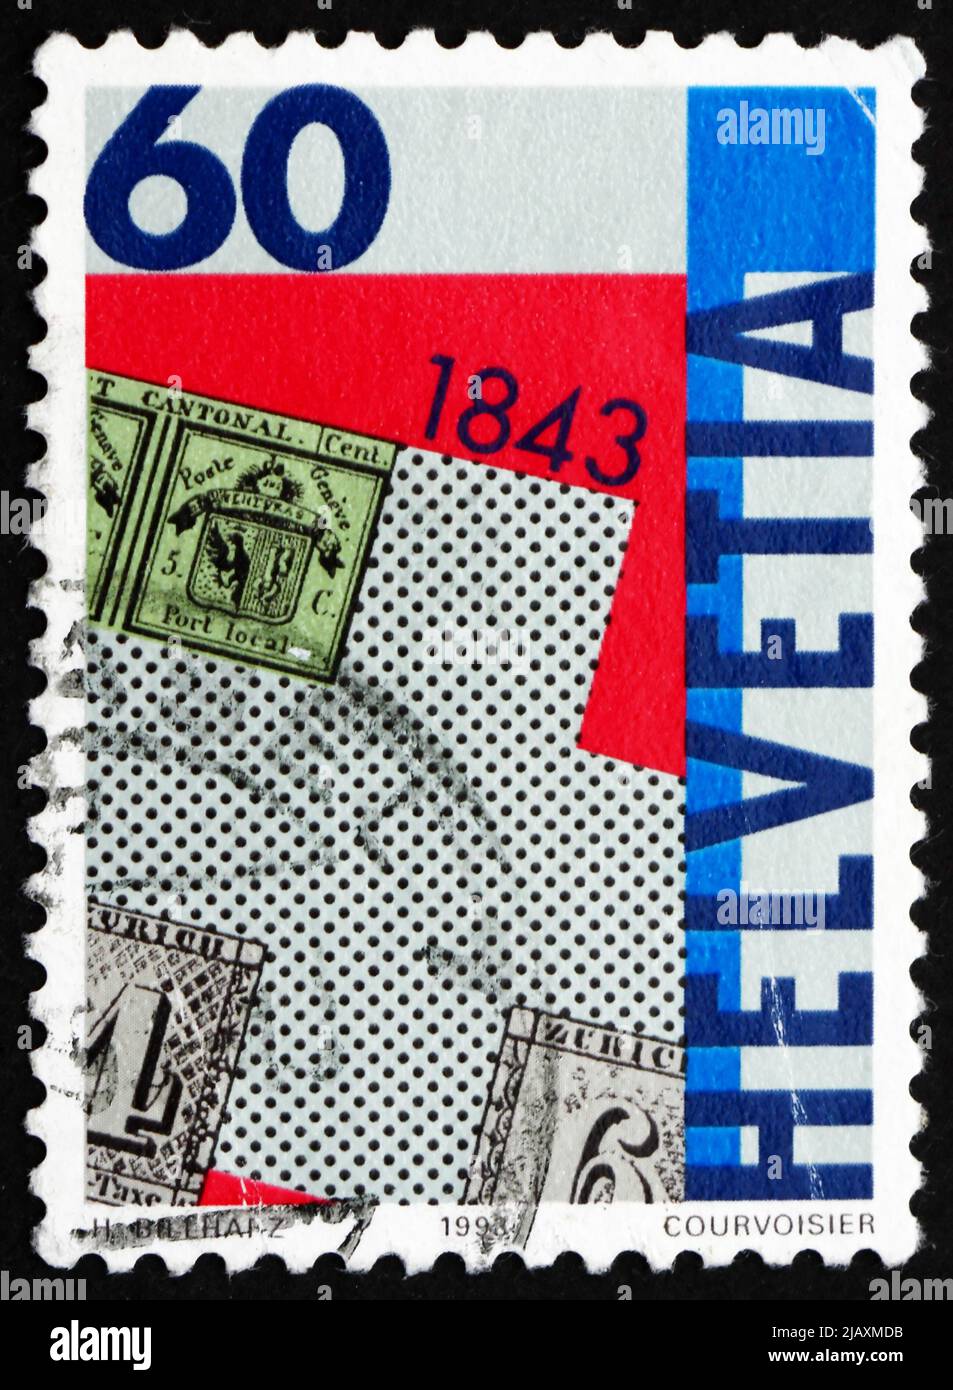 SWITZERLAND - CIRCA 1993: a stamp printed in the Switzerland shows Postage Stamp Zurich Types A1 and A2, 150th Anniversary of First Swiss Postage Stam Stock Photo